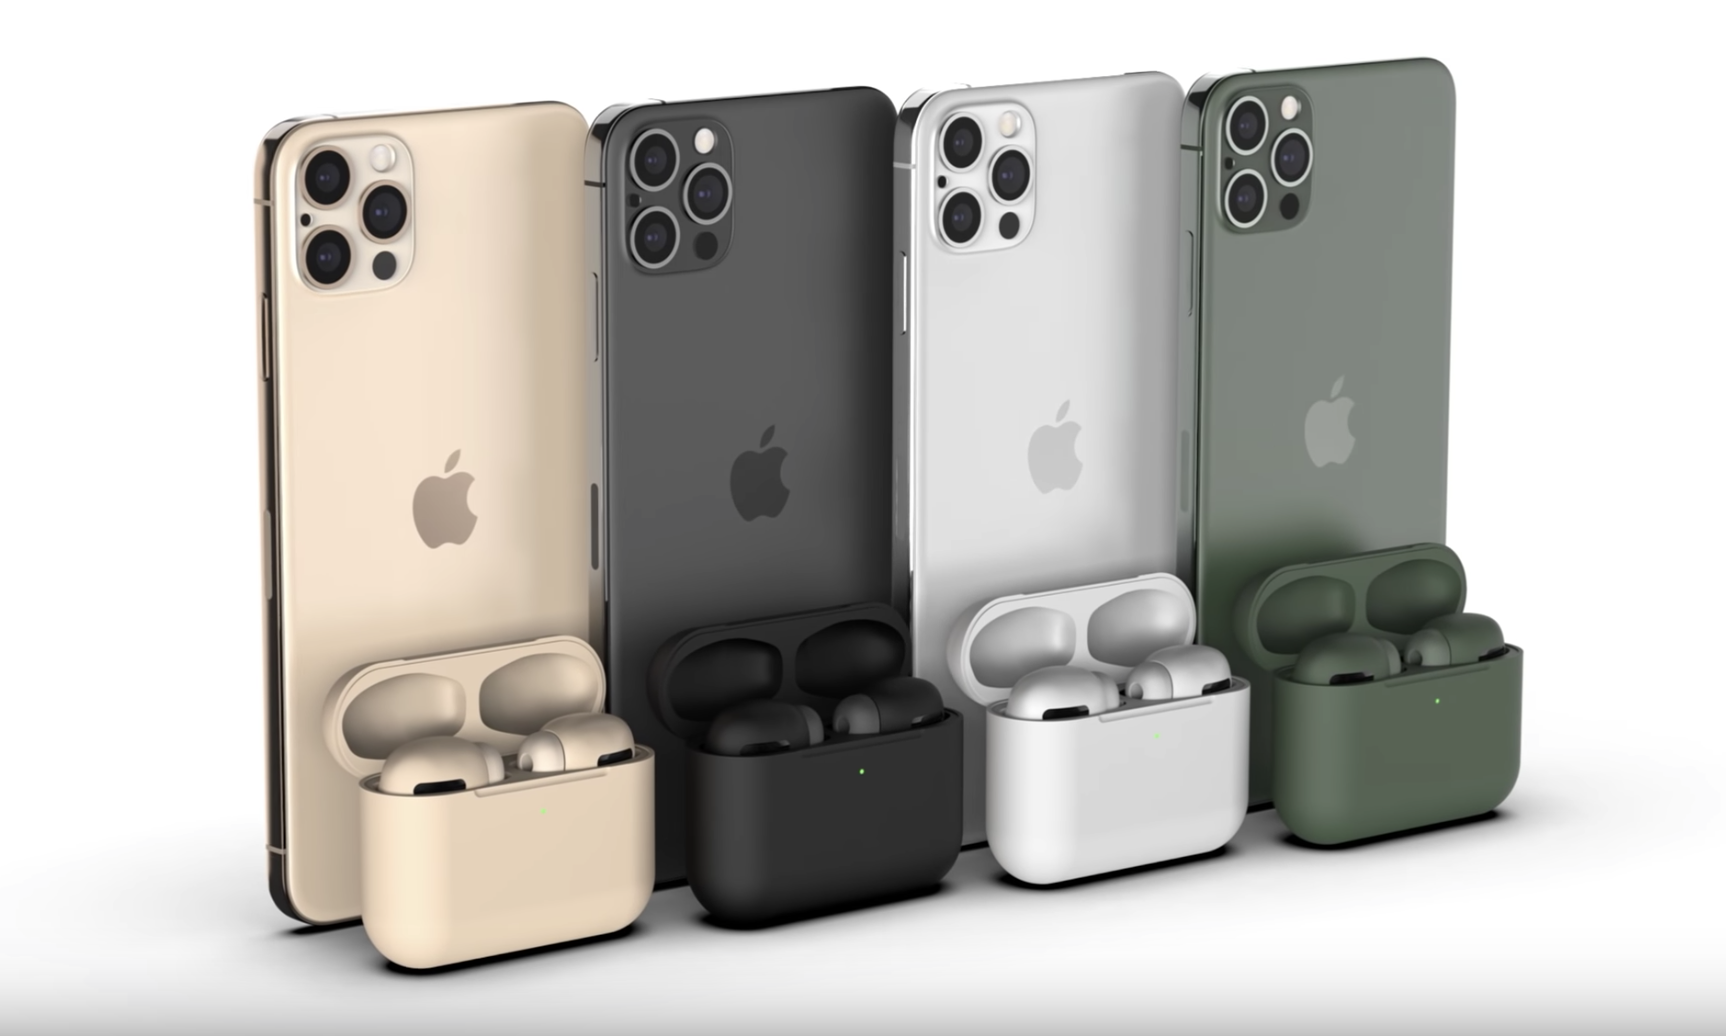 Apple AirPods Pro render